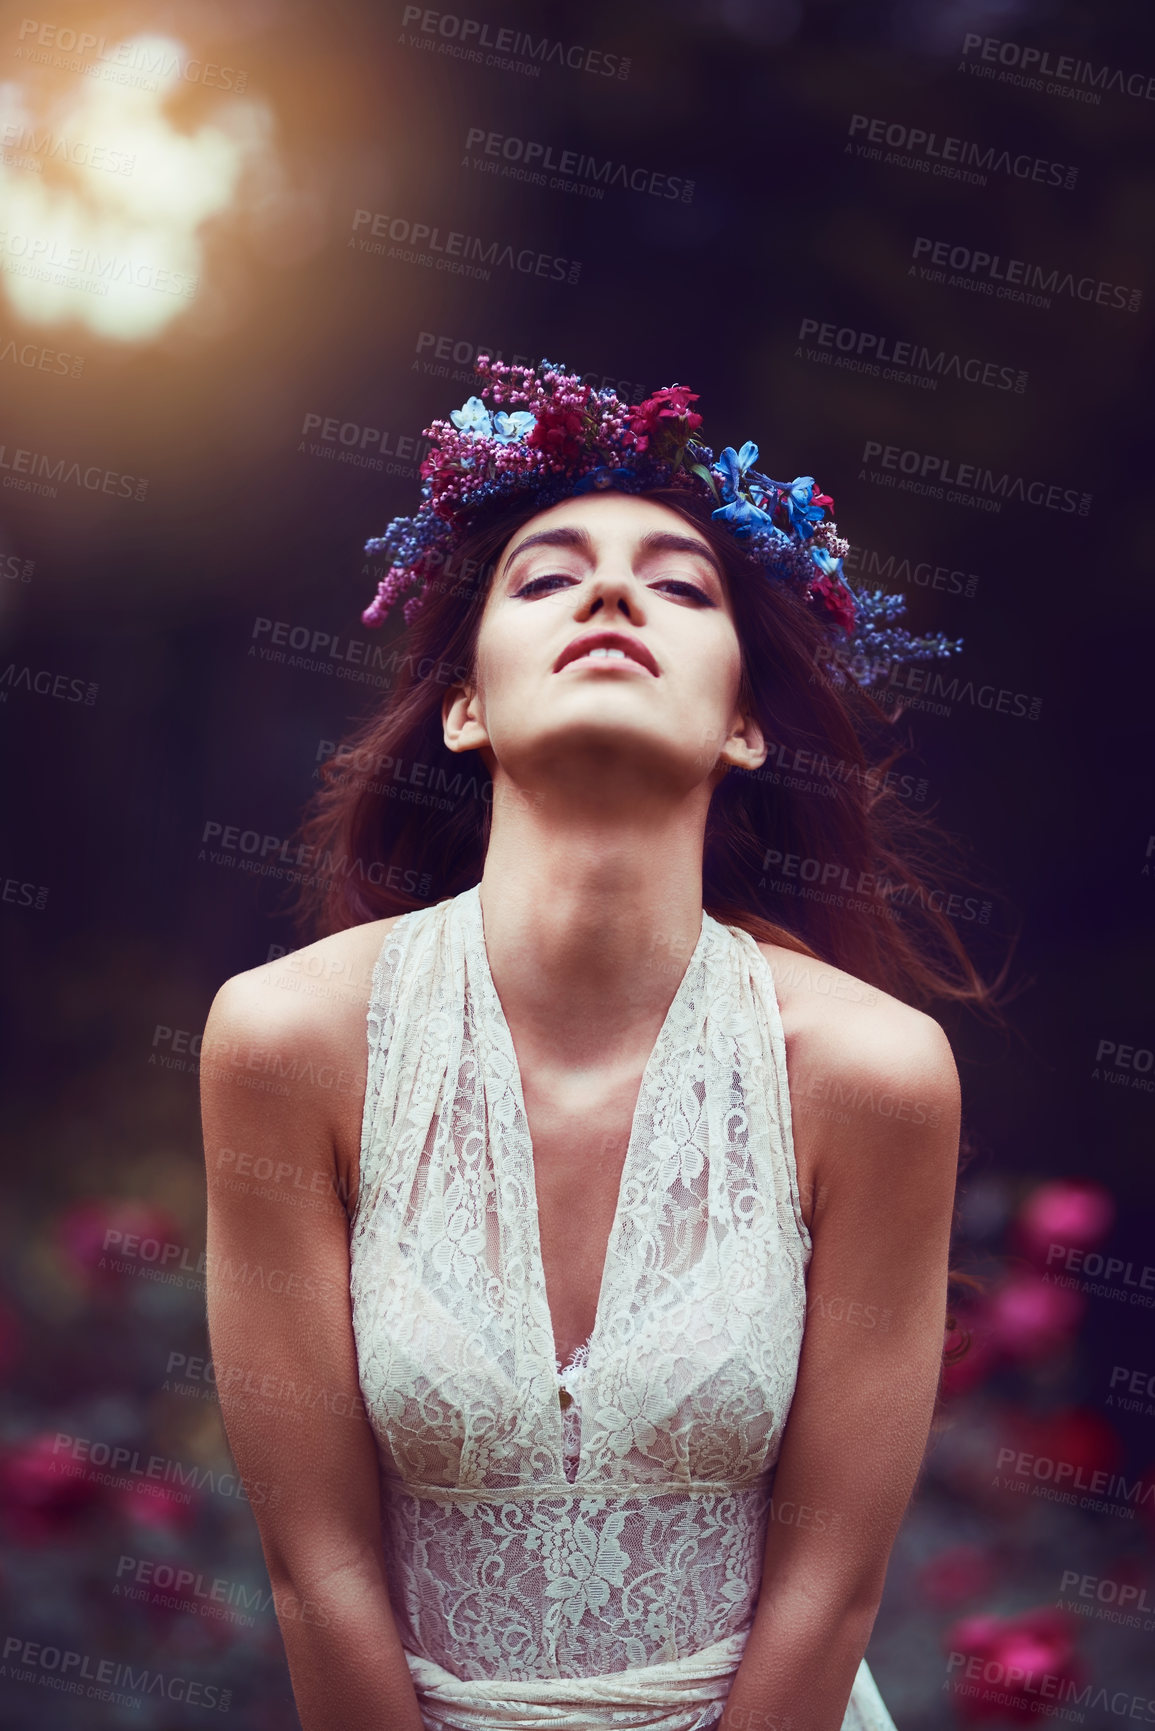 Buy stock photo Portrait of a beautiful young woman wearing a floral head wreath outdoors